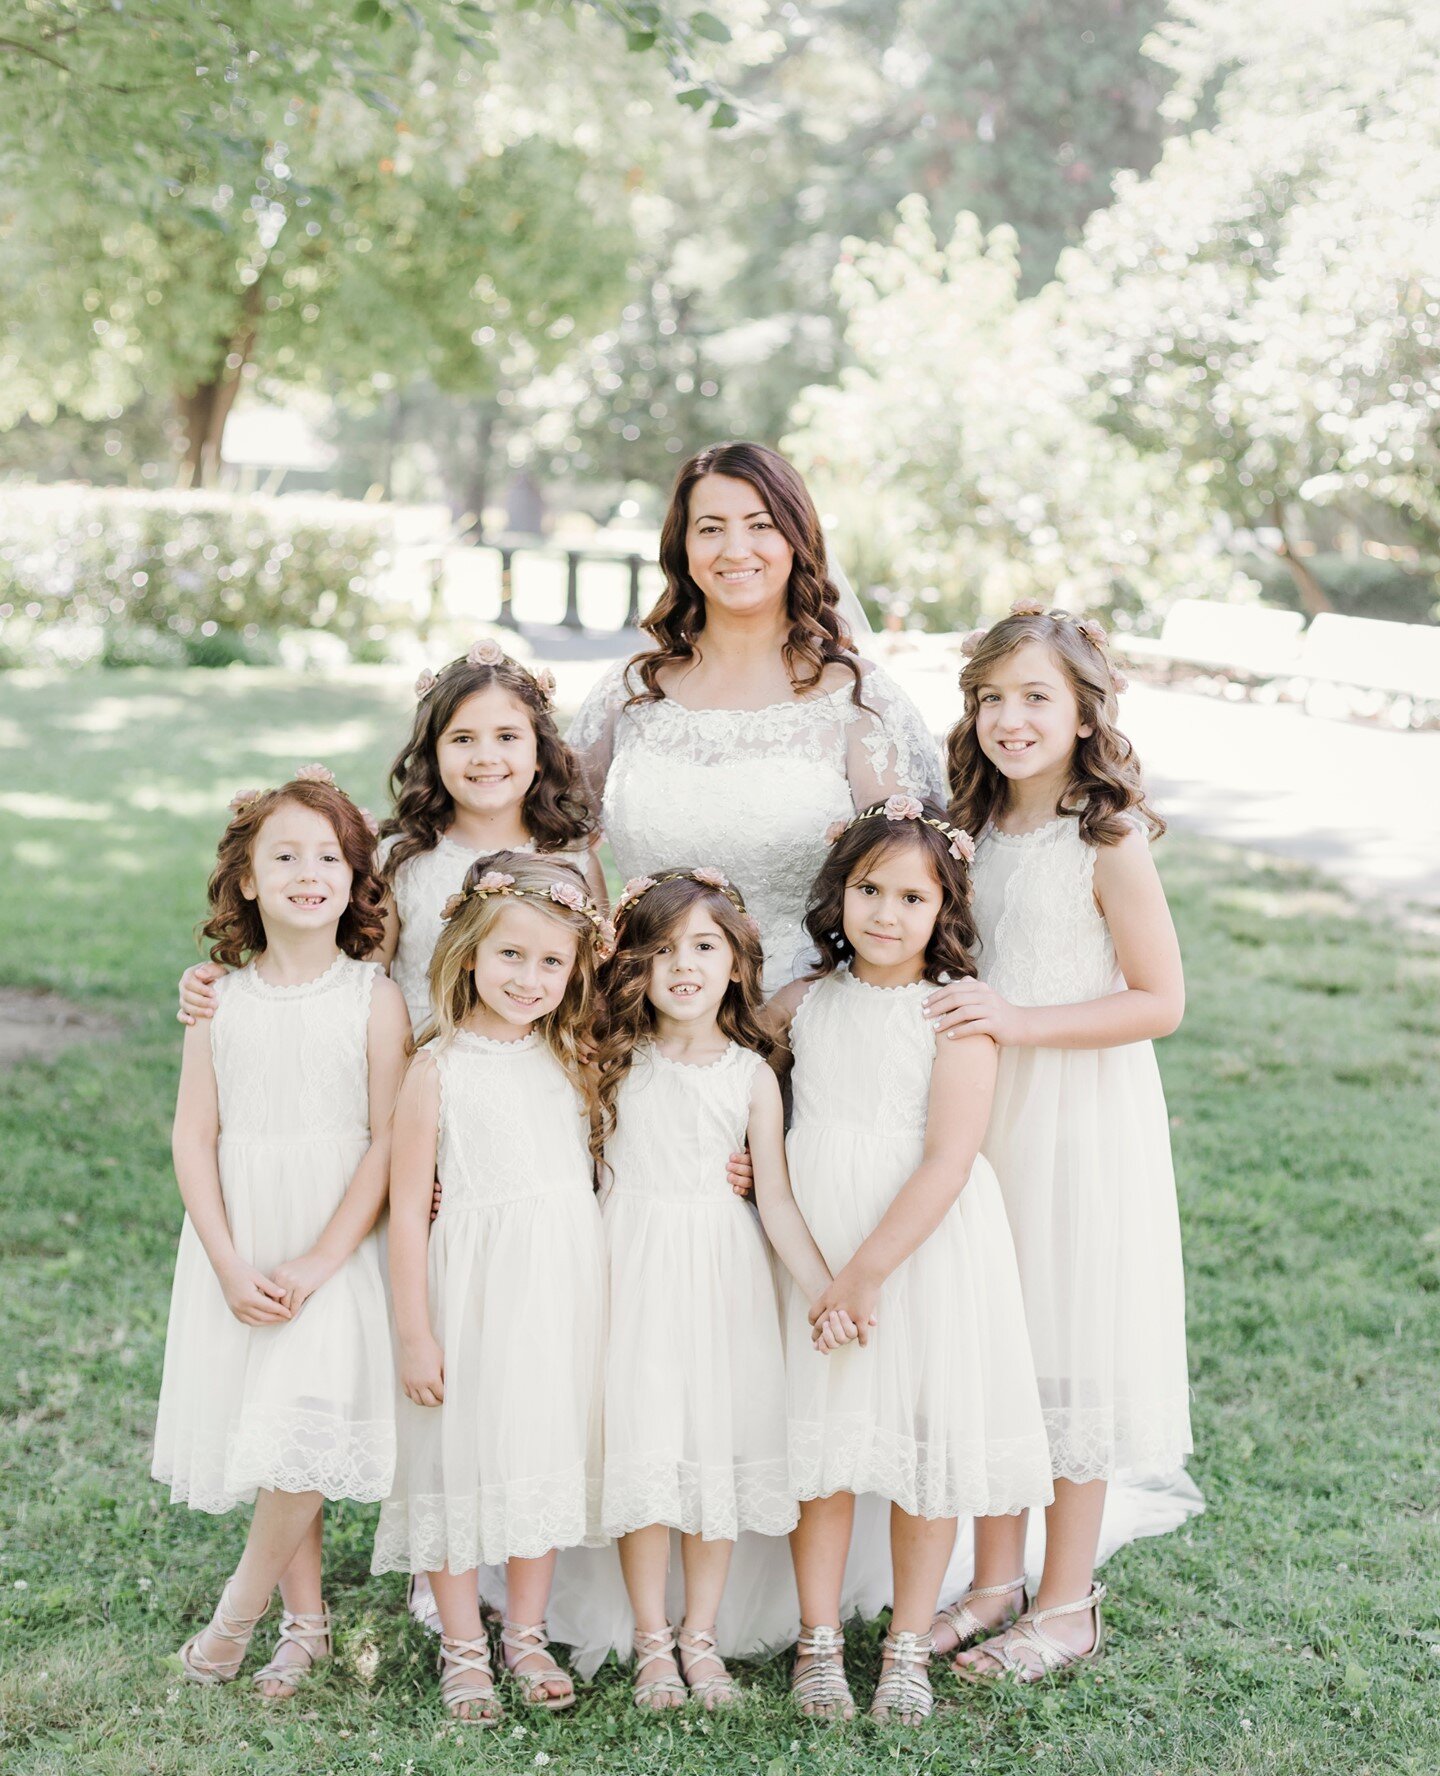 I feel like every wedding needs to have at least 5 flower girls for maximum cuteness 🥰 Seriously, how adorable are these little angels?? ✨